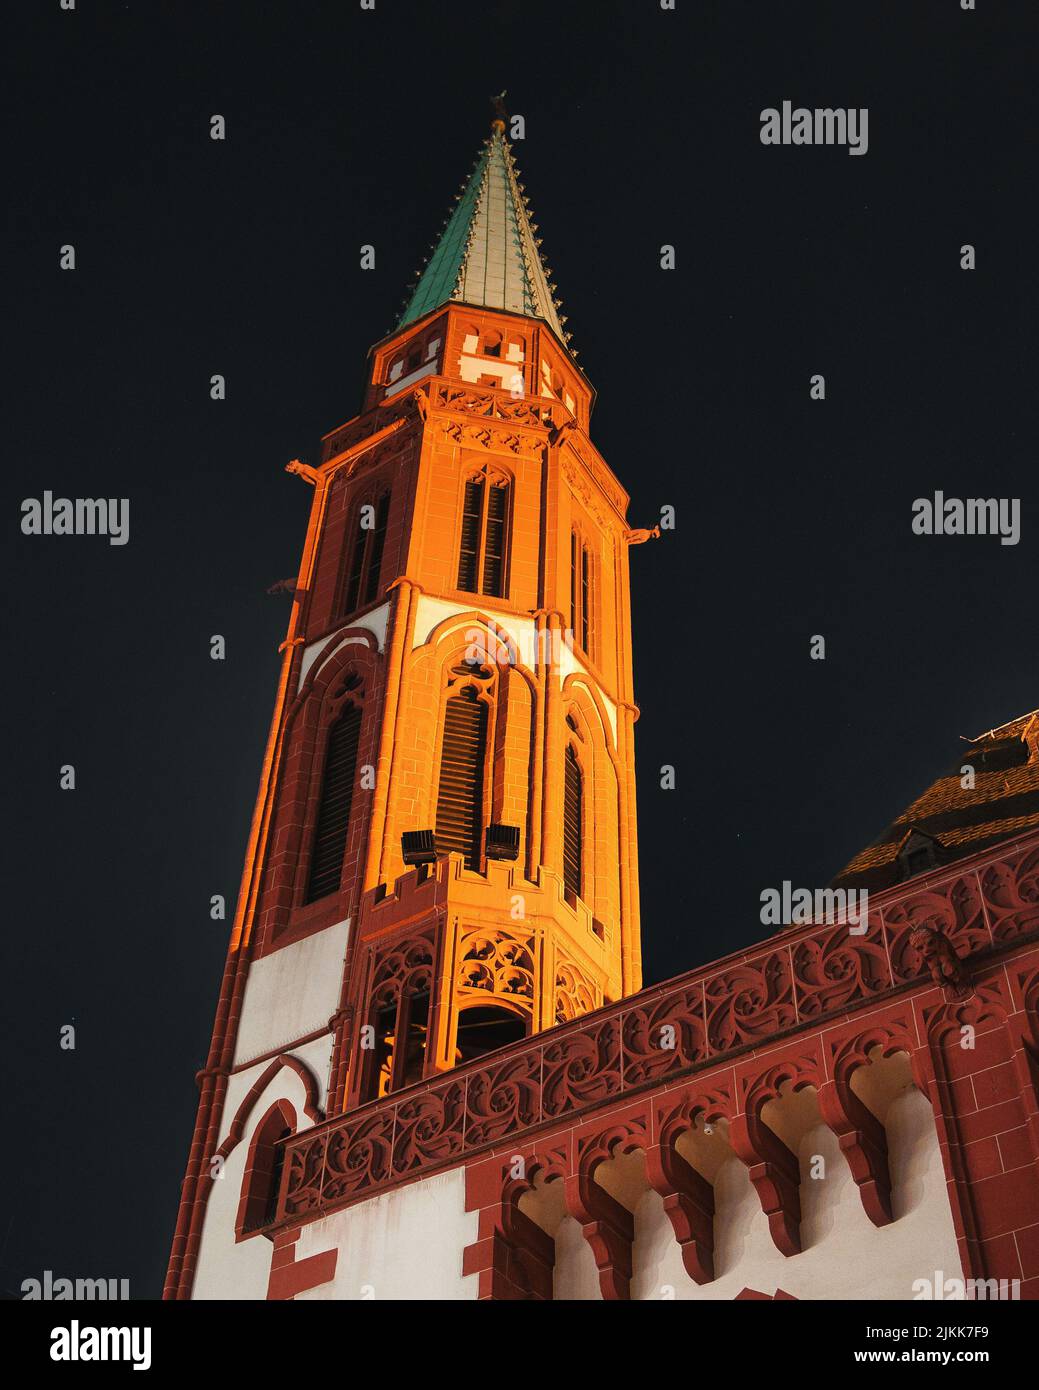 The Old St Nicholas Church in Frankfurt, Germany - a medieval Lutheran church at night Stock Photo